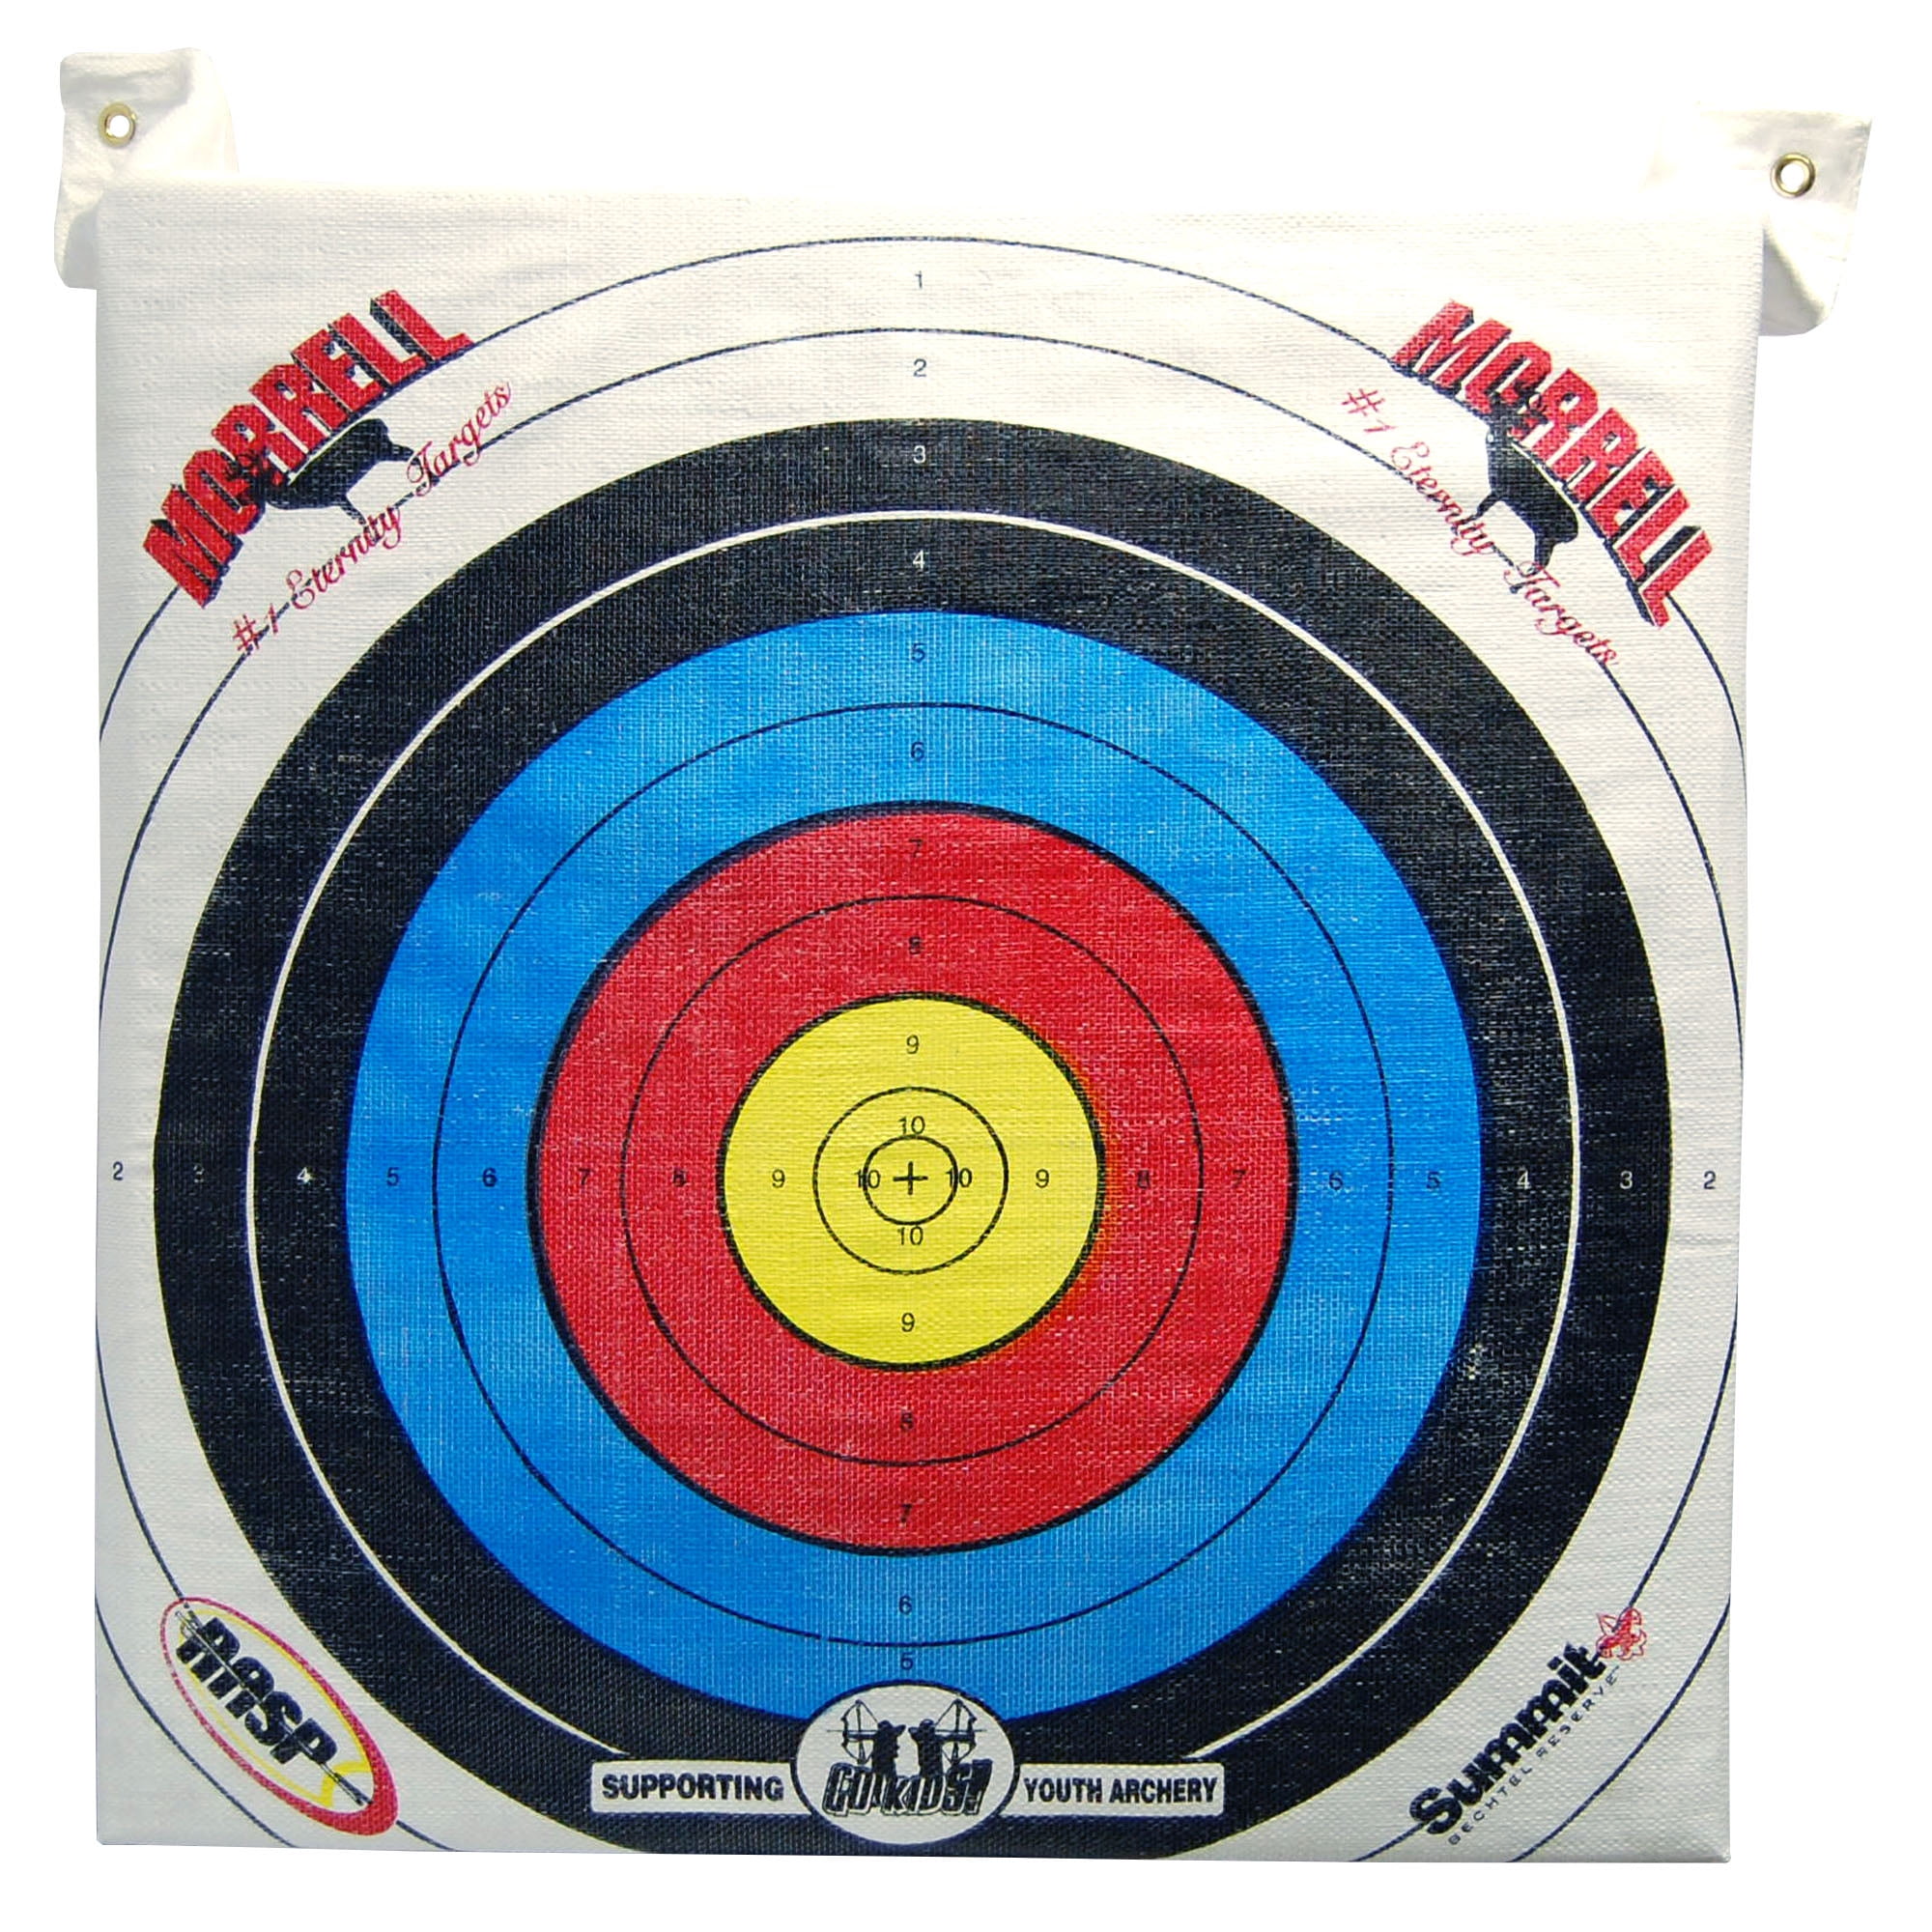 New Morrell NASP Youth Field Point Archery Bag Target 